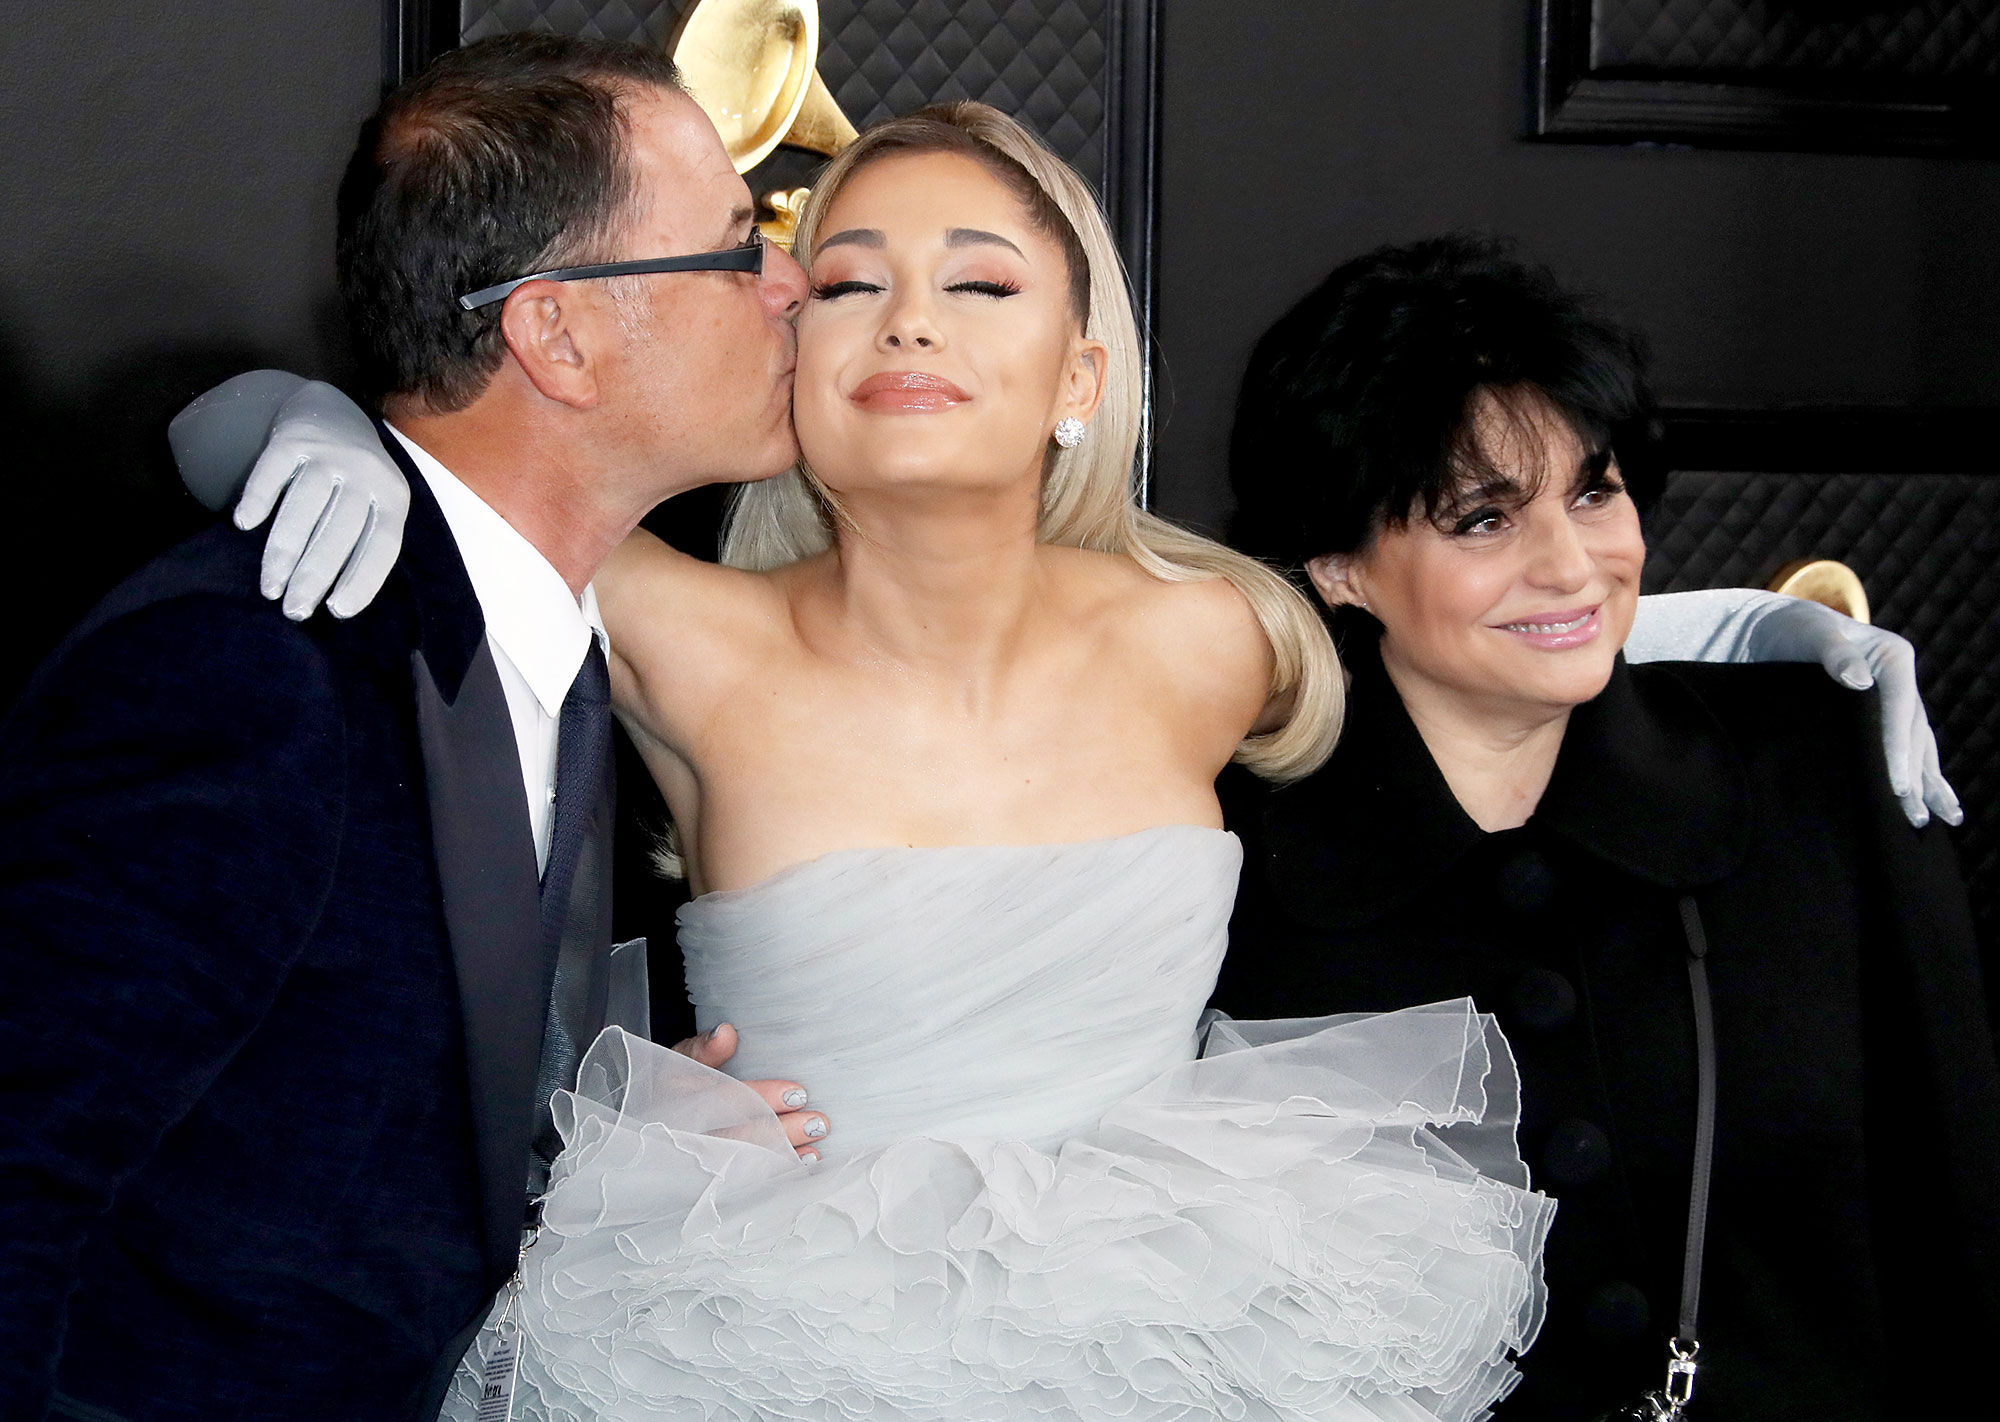 Ariana Grande Porn Mom - Grammys 2020: Ariana Grande Brings Father After Fallout